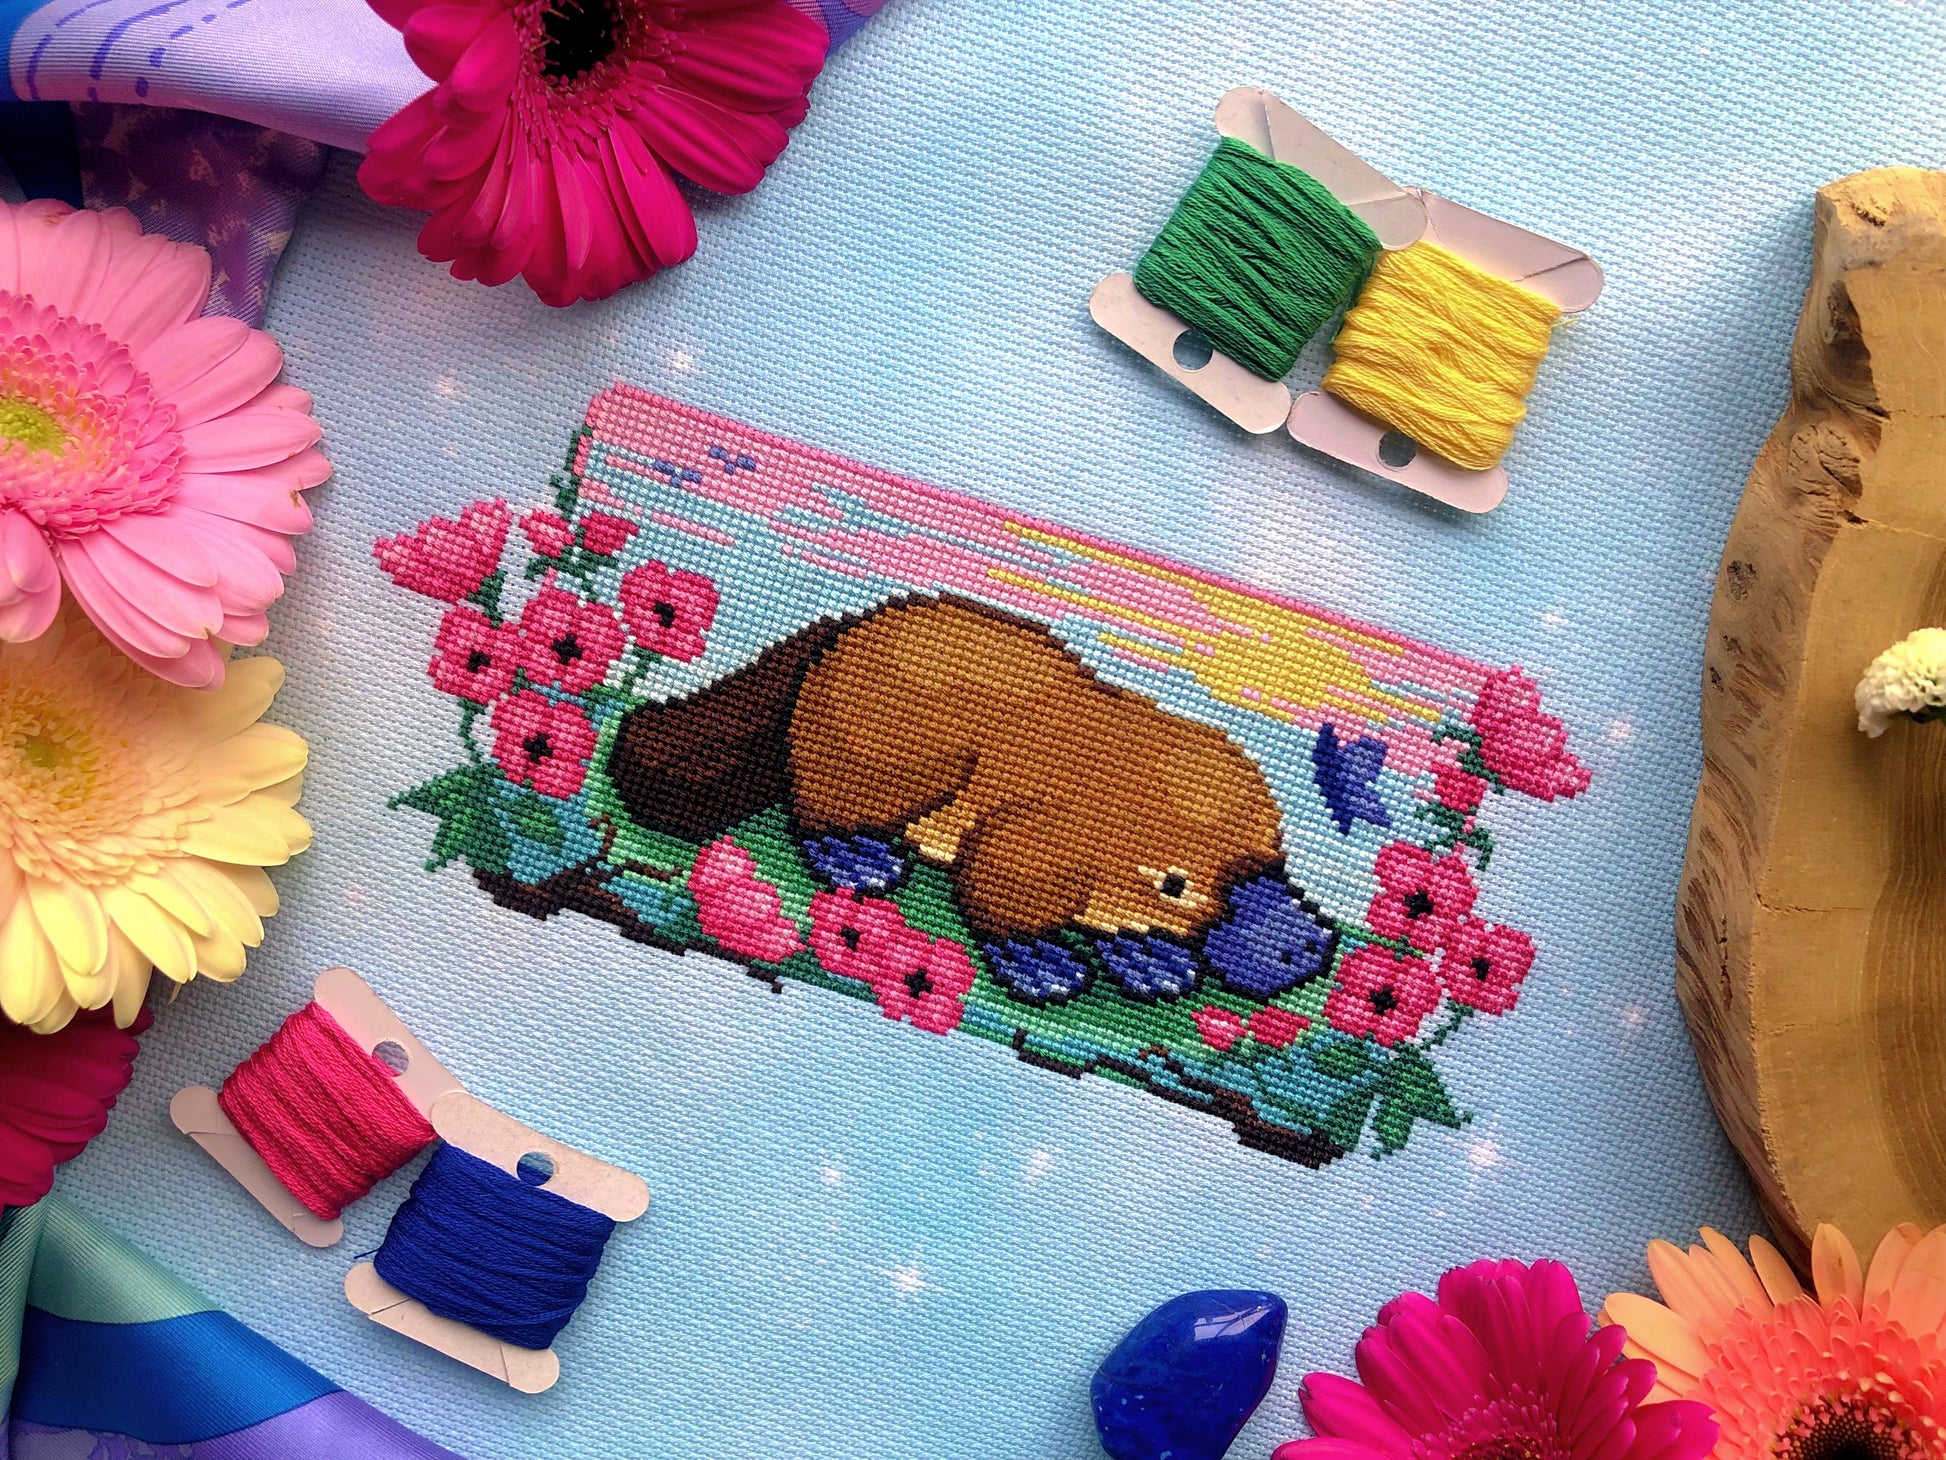 Platypus in a flower field cross stitch pattern, surrounded by flowers and bobbins. Colors are bright. Mainly pink, blue, yellow, green, and brown are present. Platypus is facing right, and is surrounded by pink flowers. There is a blue butterfly.